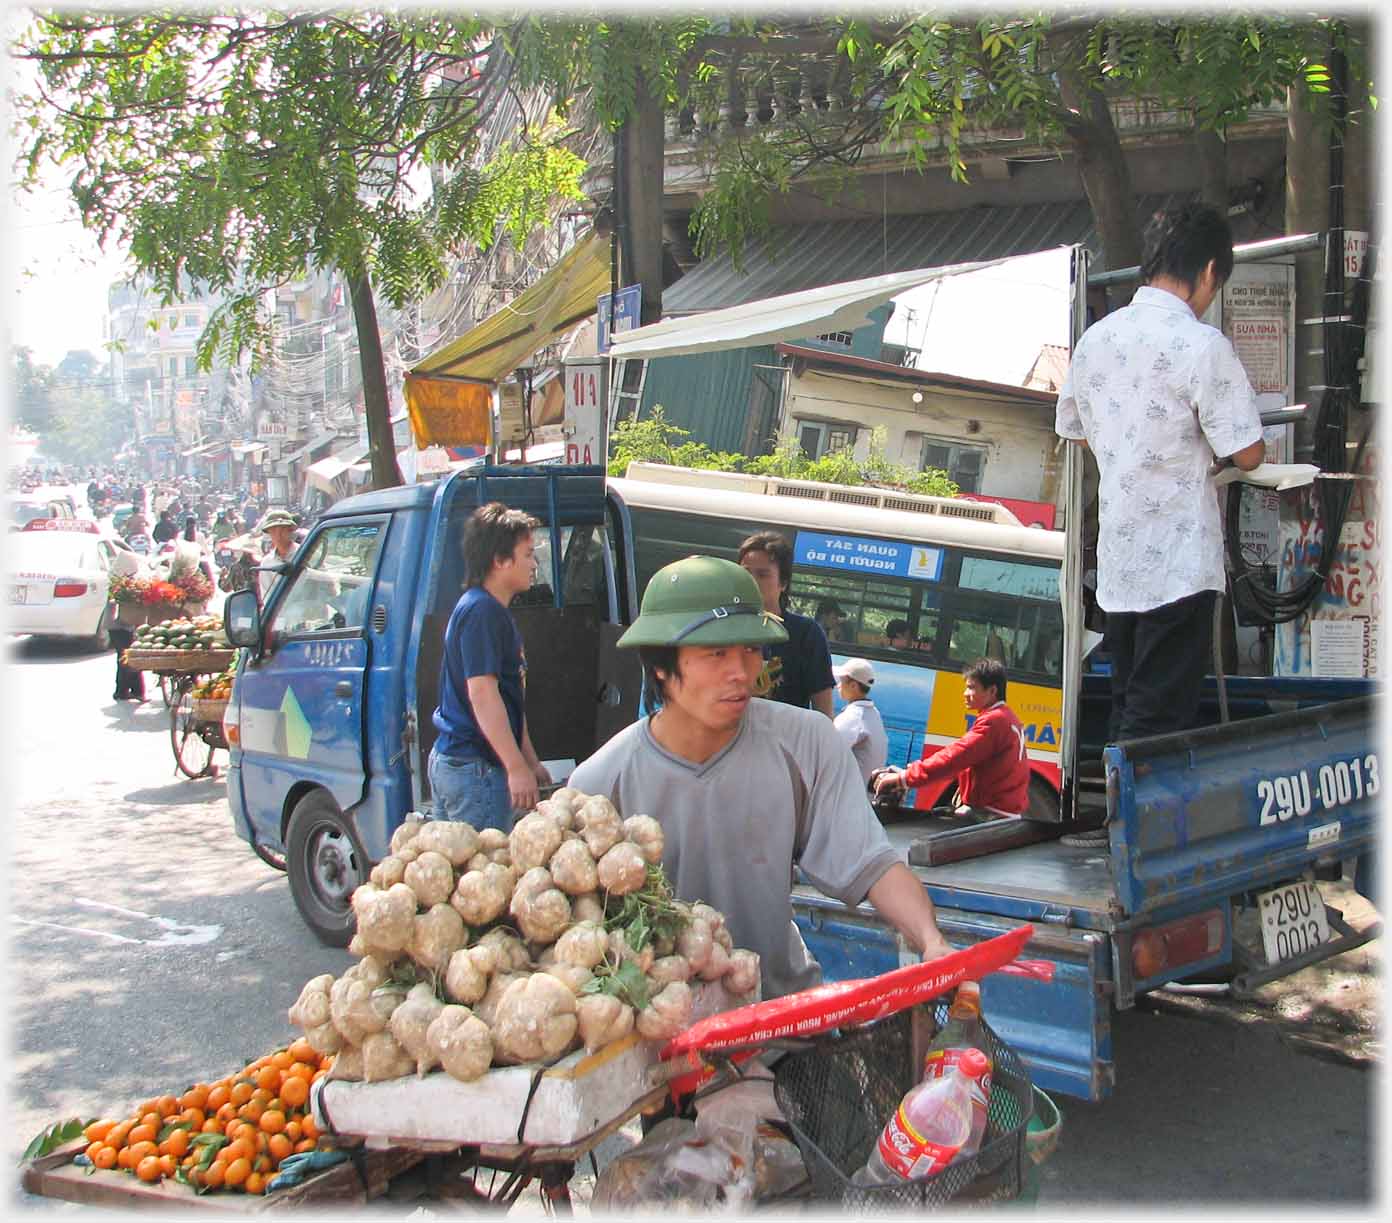 Man wheeling bike laden with fruit and vegetables.